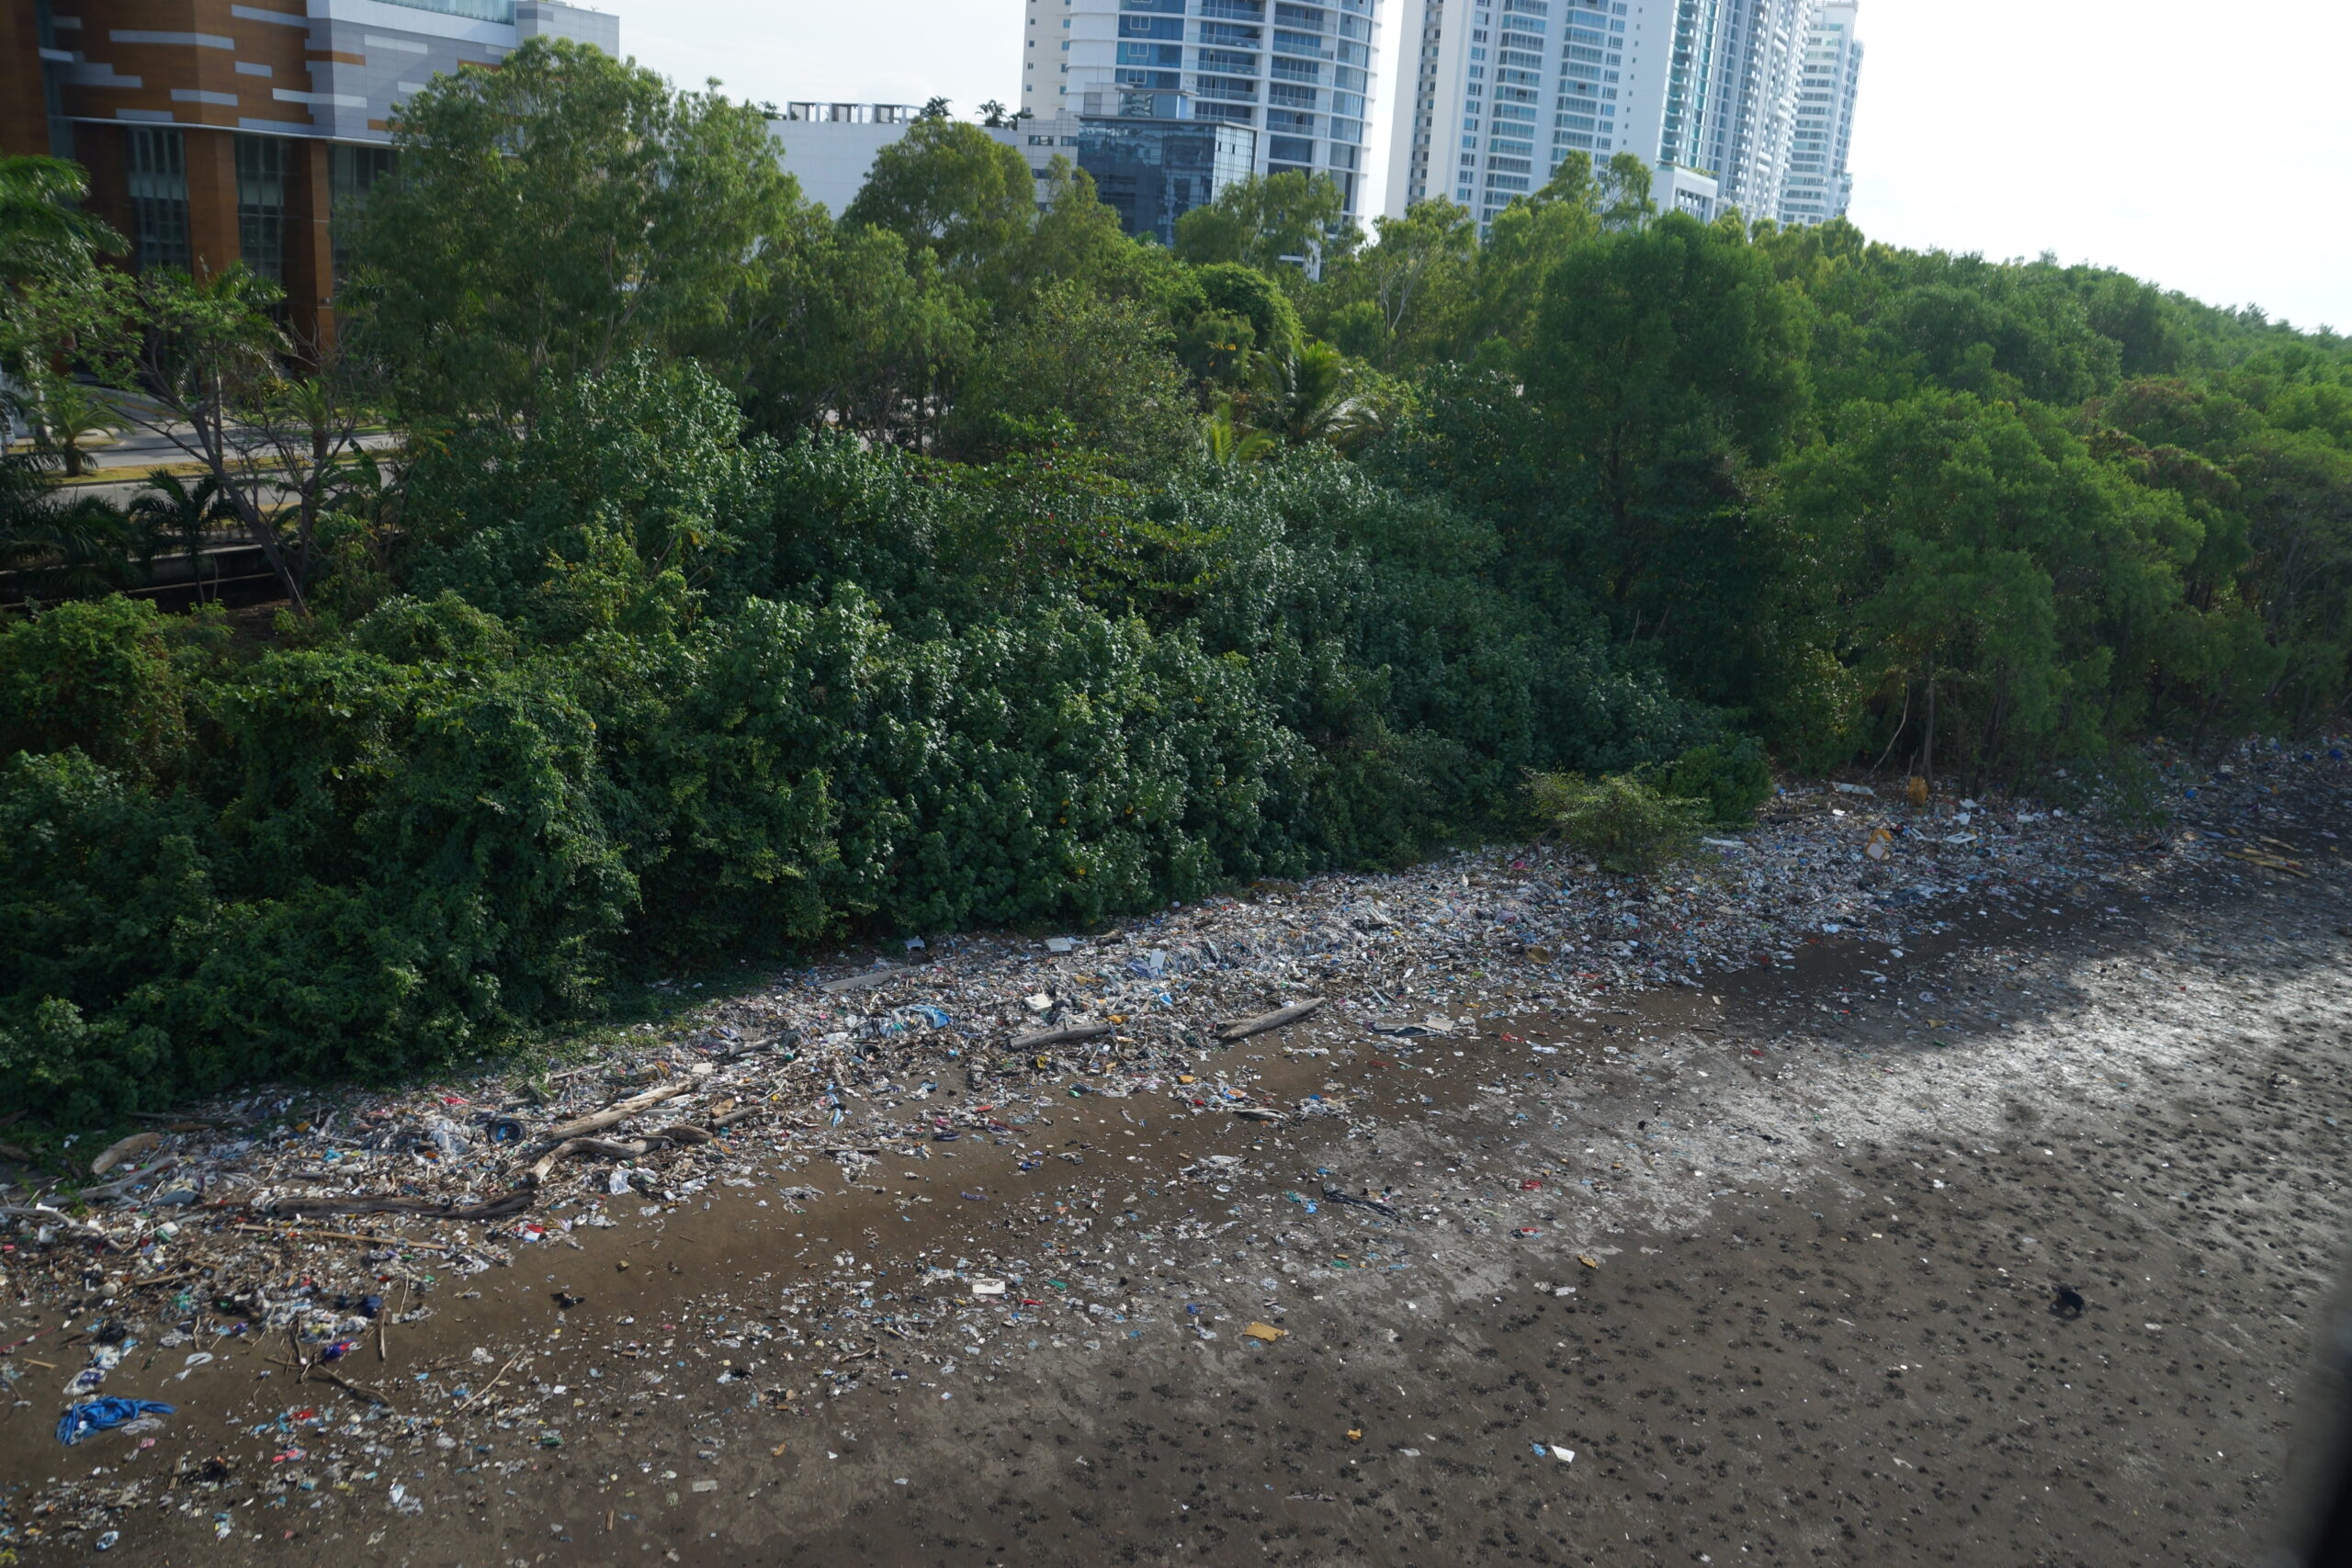 In the distance, two high-rise condominium buildings emerge from behind a dense canopy of trees. In the foreground, a muddy river channel is lined with plastic and other debris.